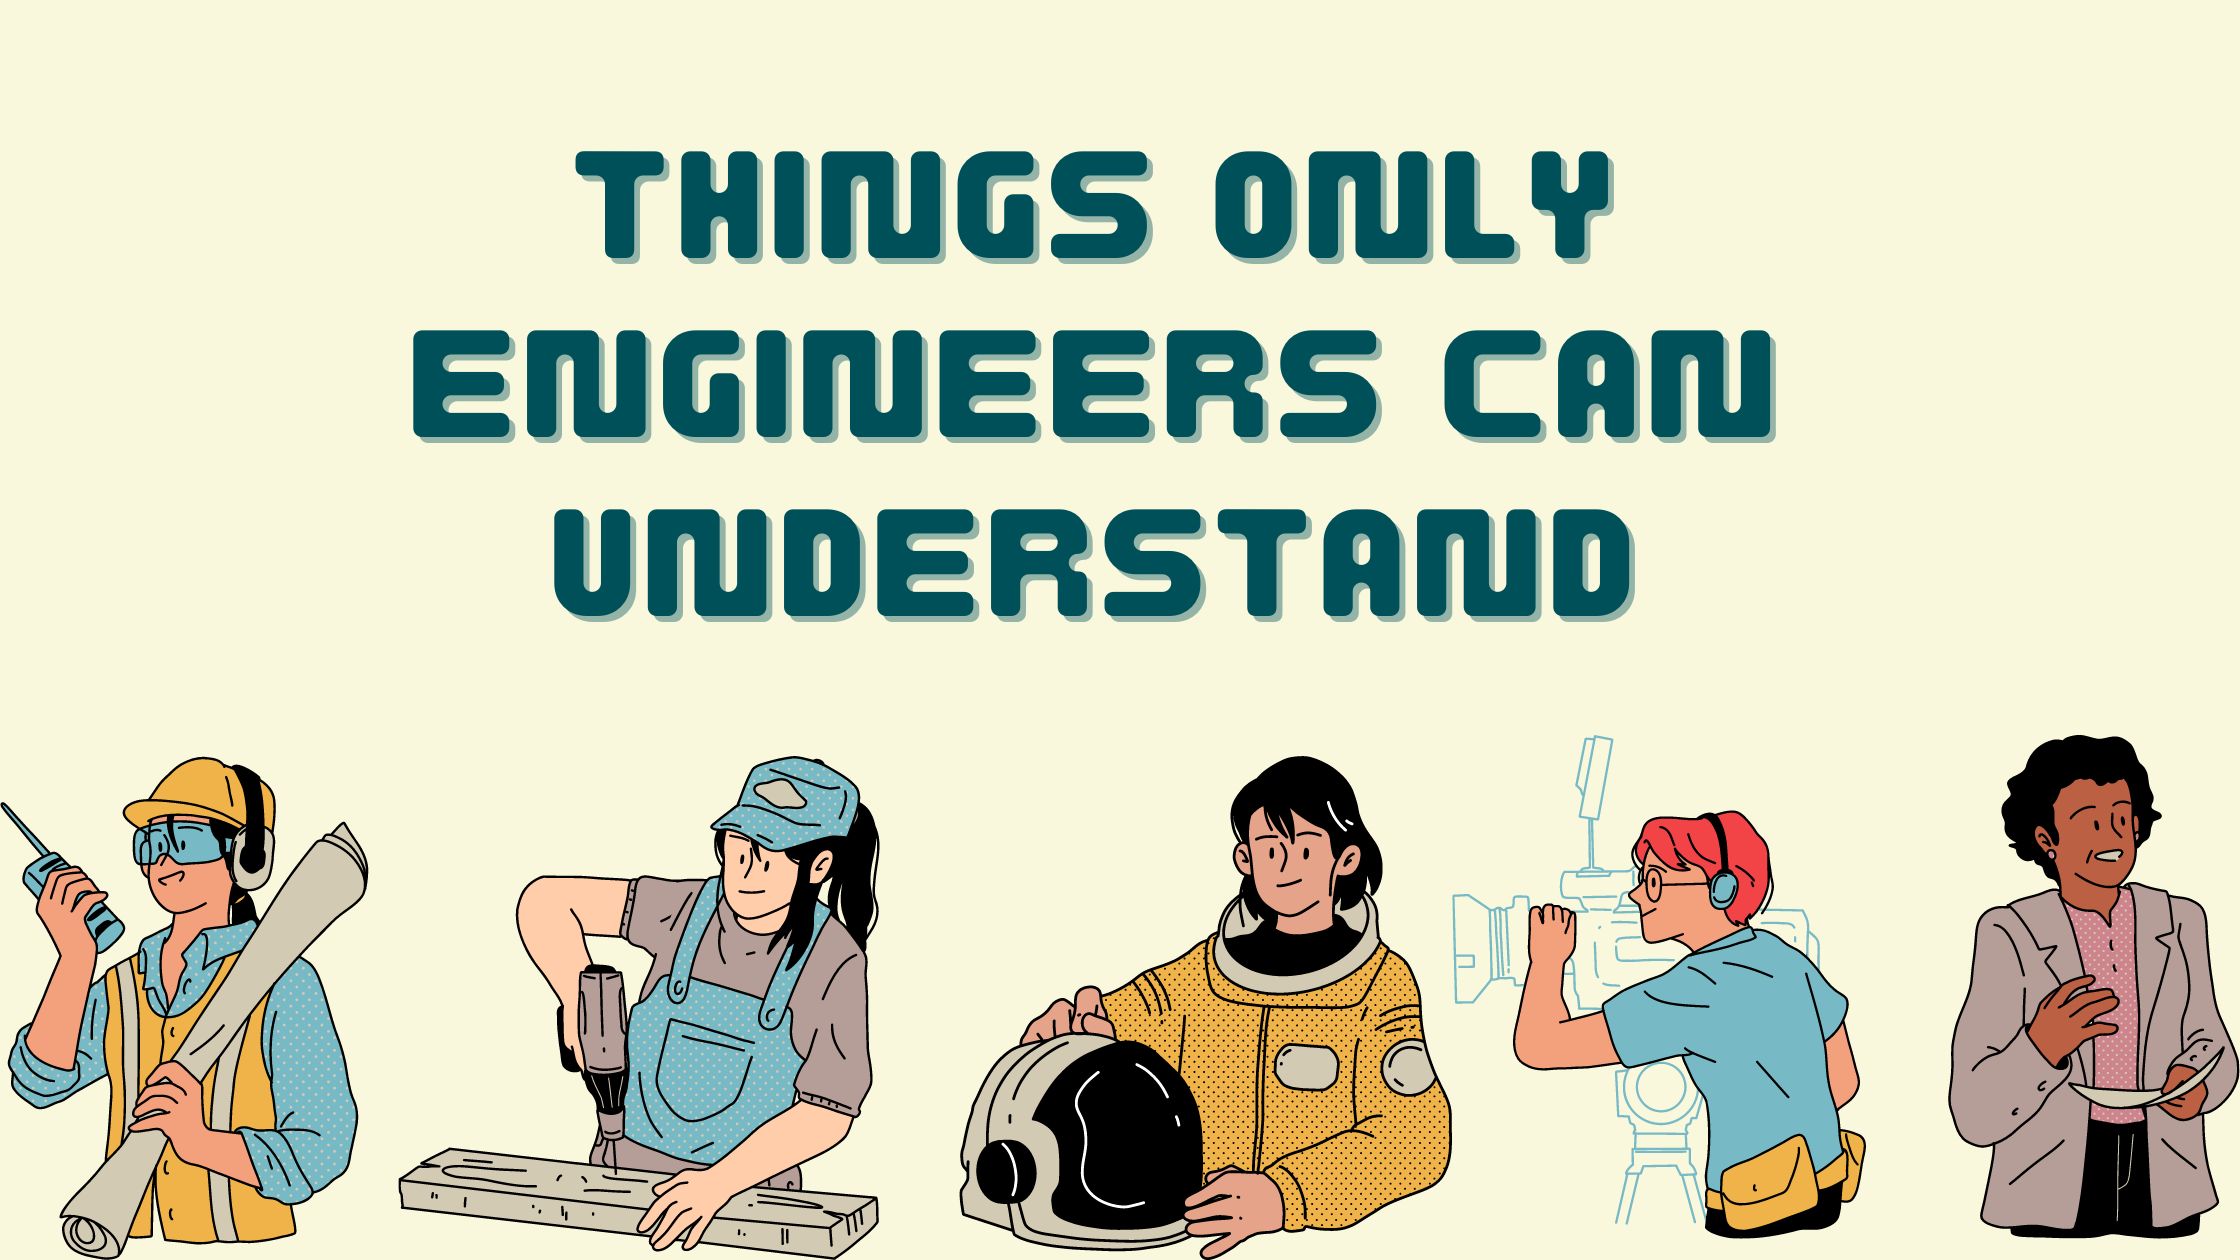 Things only engineers can understand